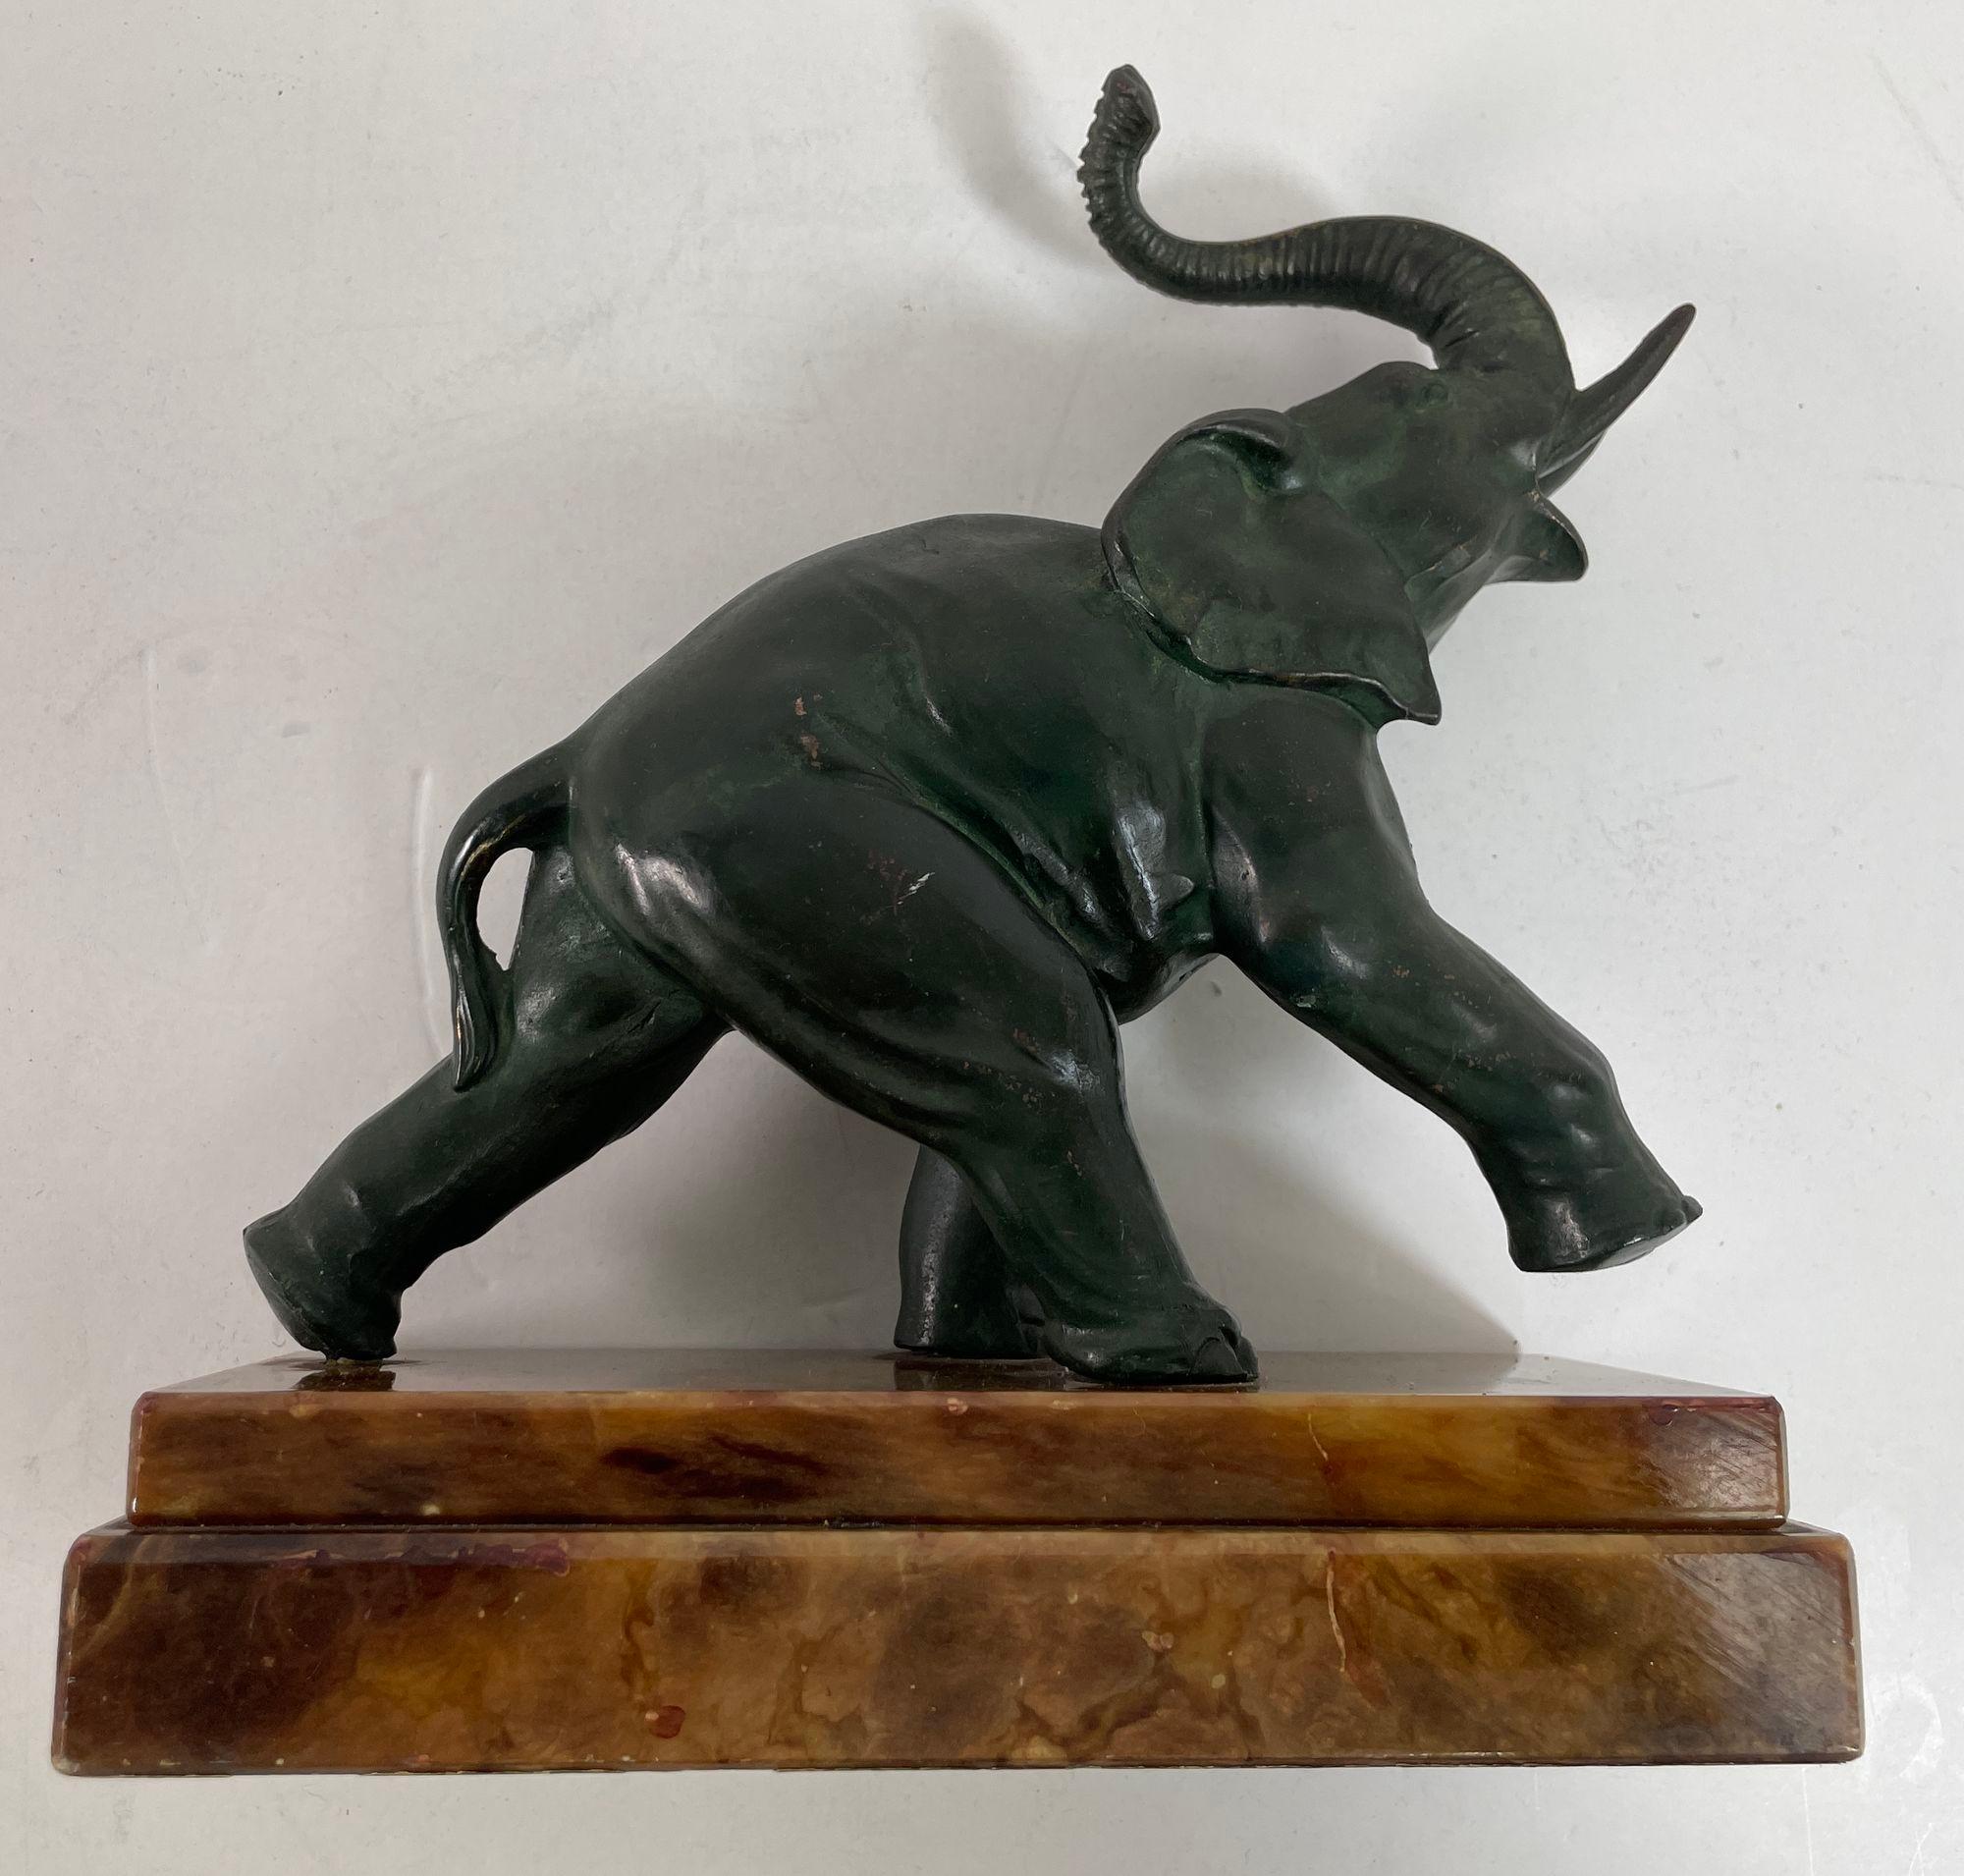 Art Deco Bronze Elephant Sculpture with Raised Trunk Made in Italy For Sale 4